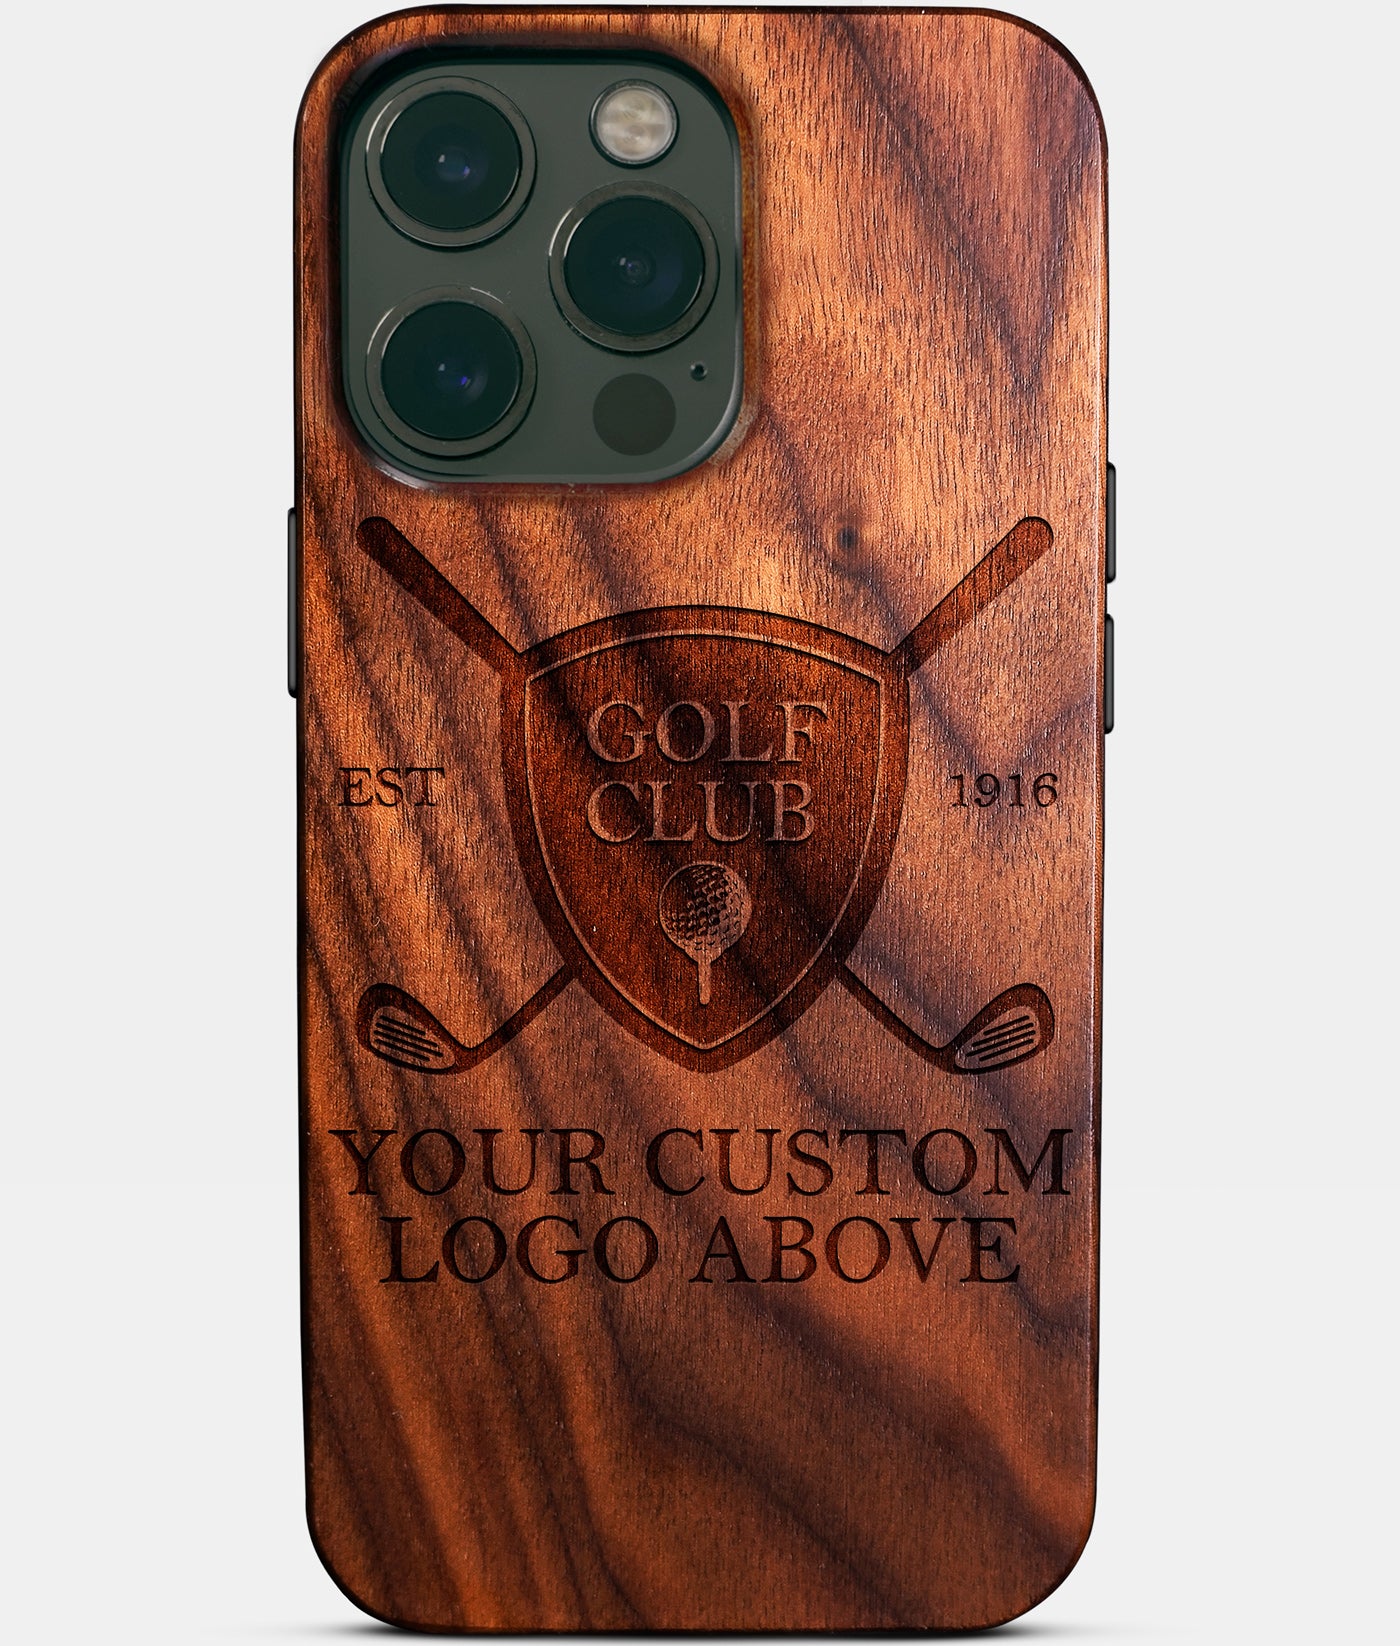 Company Golf Gifts - Tournament Gifts, Custom Country Club Accessories, Golf iPhone 14 Pro Max Cases | Golf Gifts for husband, boyfriend golfer, 2022 Christmas gifts for golfer Personalized Golf Gifts For Men - Carved Wood Custom Golf Gift For Him - Monogrammed Unusual Golf iPhone 14 Pro Max Covers